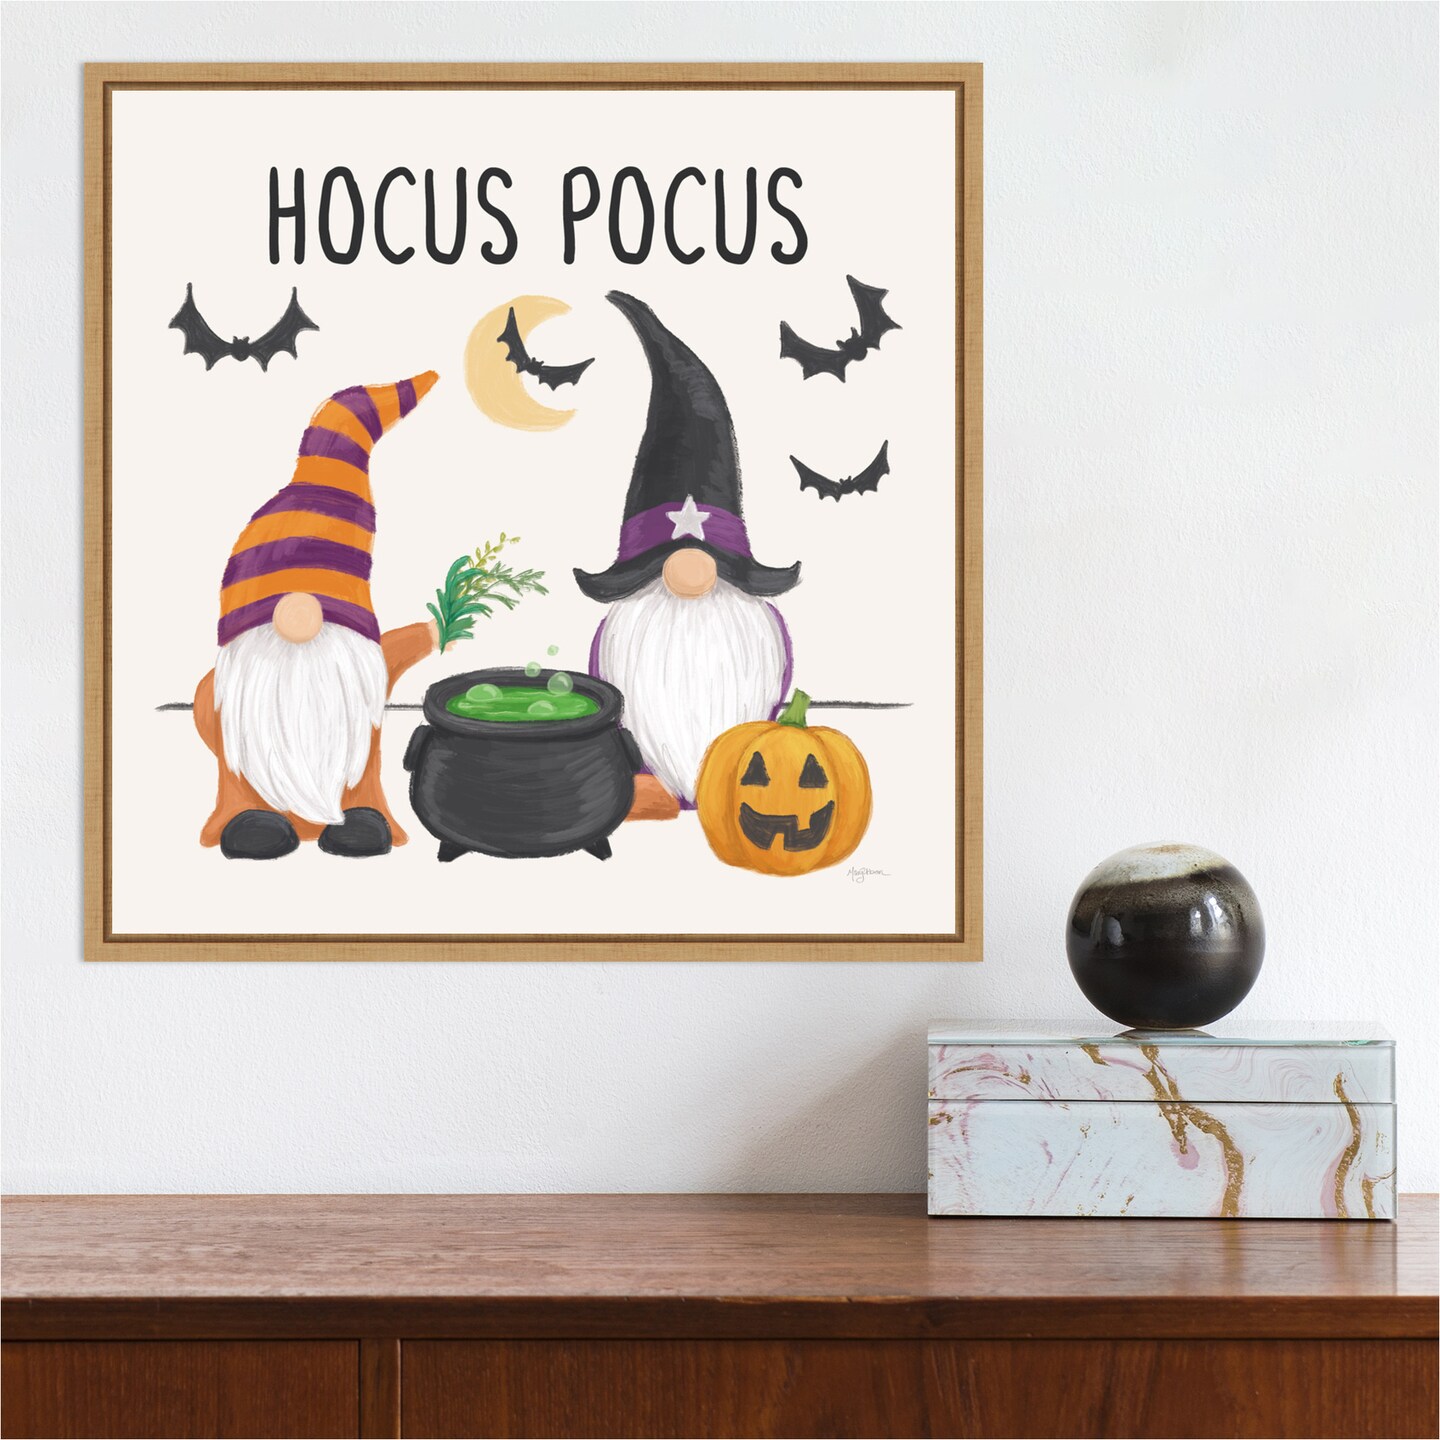 Halloween Gnomes II by Mary Urban 16-in. W x 16-in. H. Canvas Wall Art Print Framed in Natural